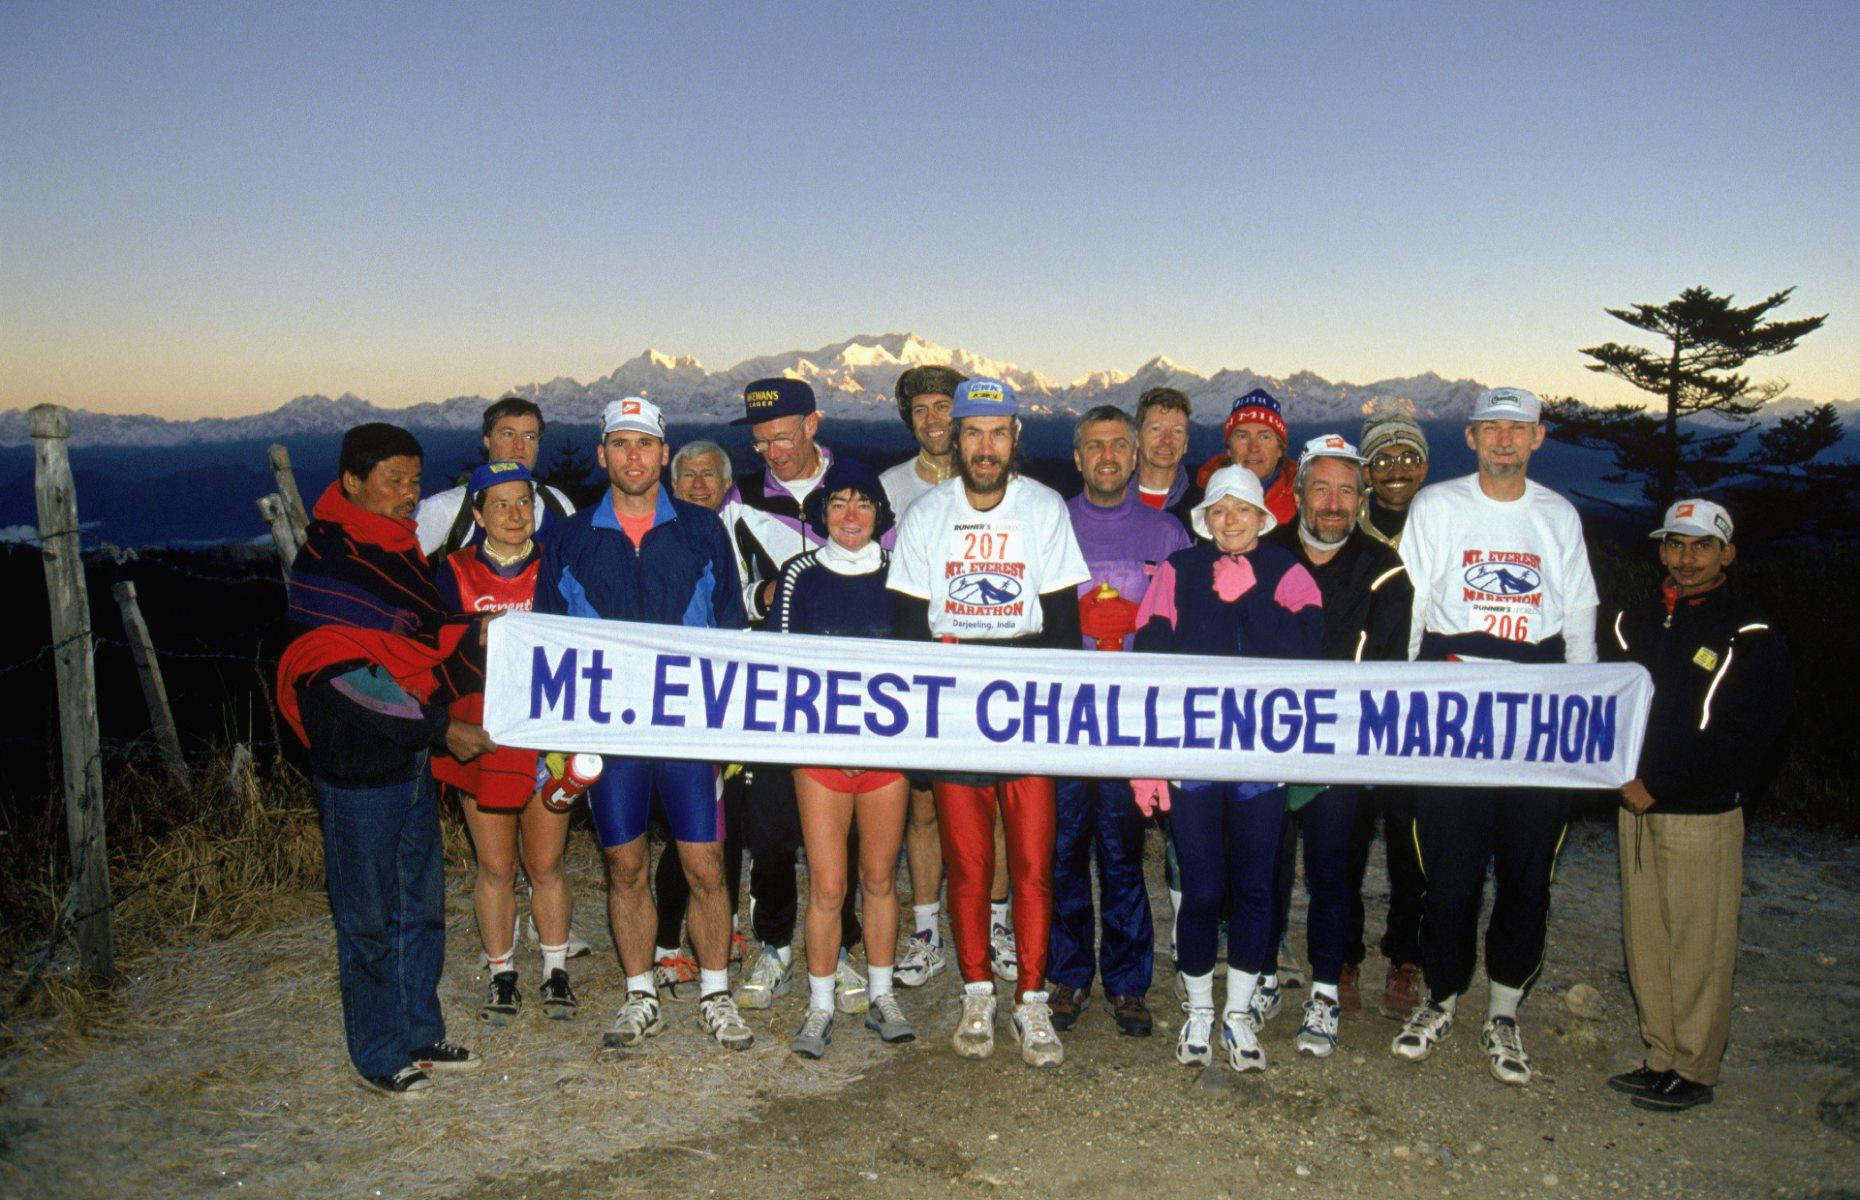 <p>Not content with the challenge of simply climbing the mountain, in 1987 Diana Penny-Sherpani created the first Everest Marathon. Despite concerns voiced by the medical community, the event was a success, with 45 athletes from five countries running between Gorak Shep at 17,100 feet (5,212m) elevation and Namche Bazaar at 11,300 feet (3,444m) elevation. The biennial event holds a <a href="https://www.guinnessworldrecords.com/world-records/highest-marathon">Guinness World Record</a> for the highest marathon and you can still run it today. </p>  <p><a href="https://www.loveexploring.com/galleryextended/98727/amazing-places-saved-from-destruction?page=1"><strong>Discover the amazing places that were saved from destruction</strong></a></p>